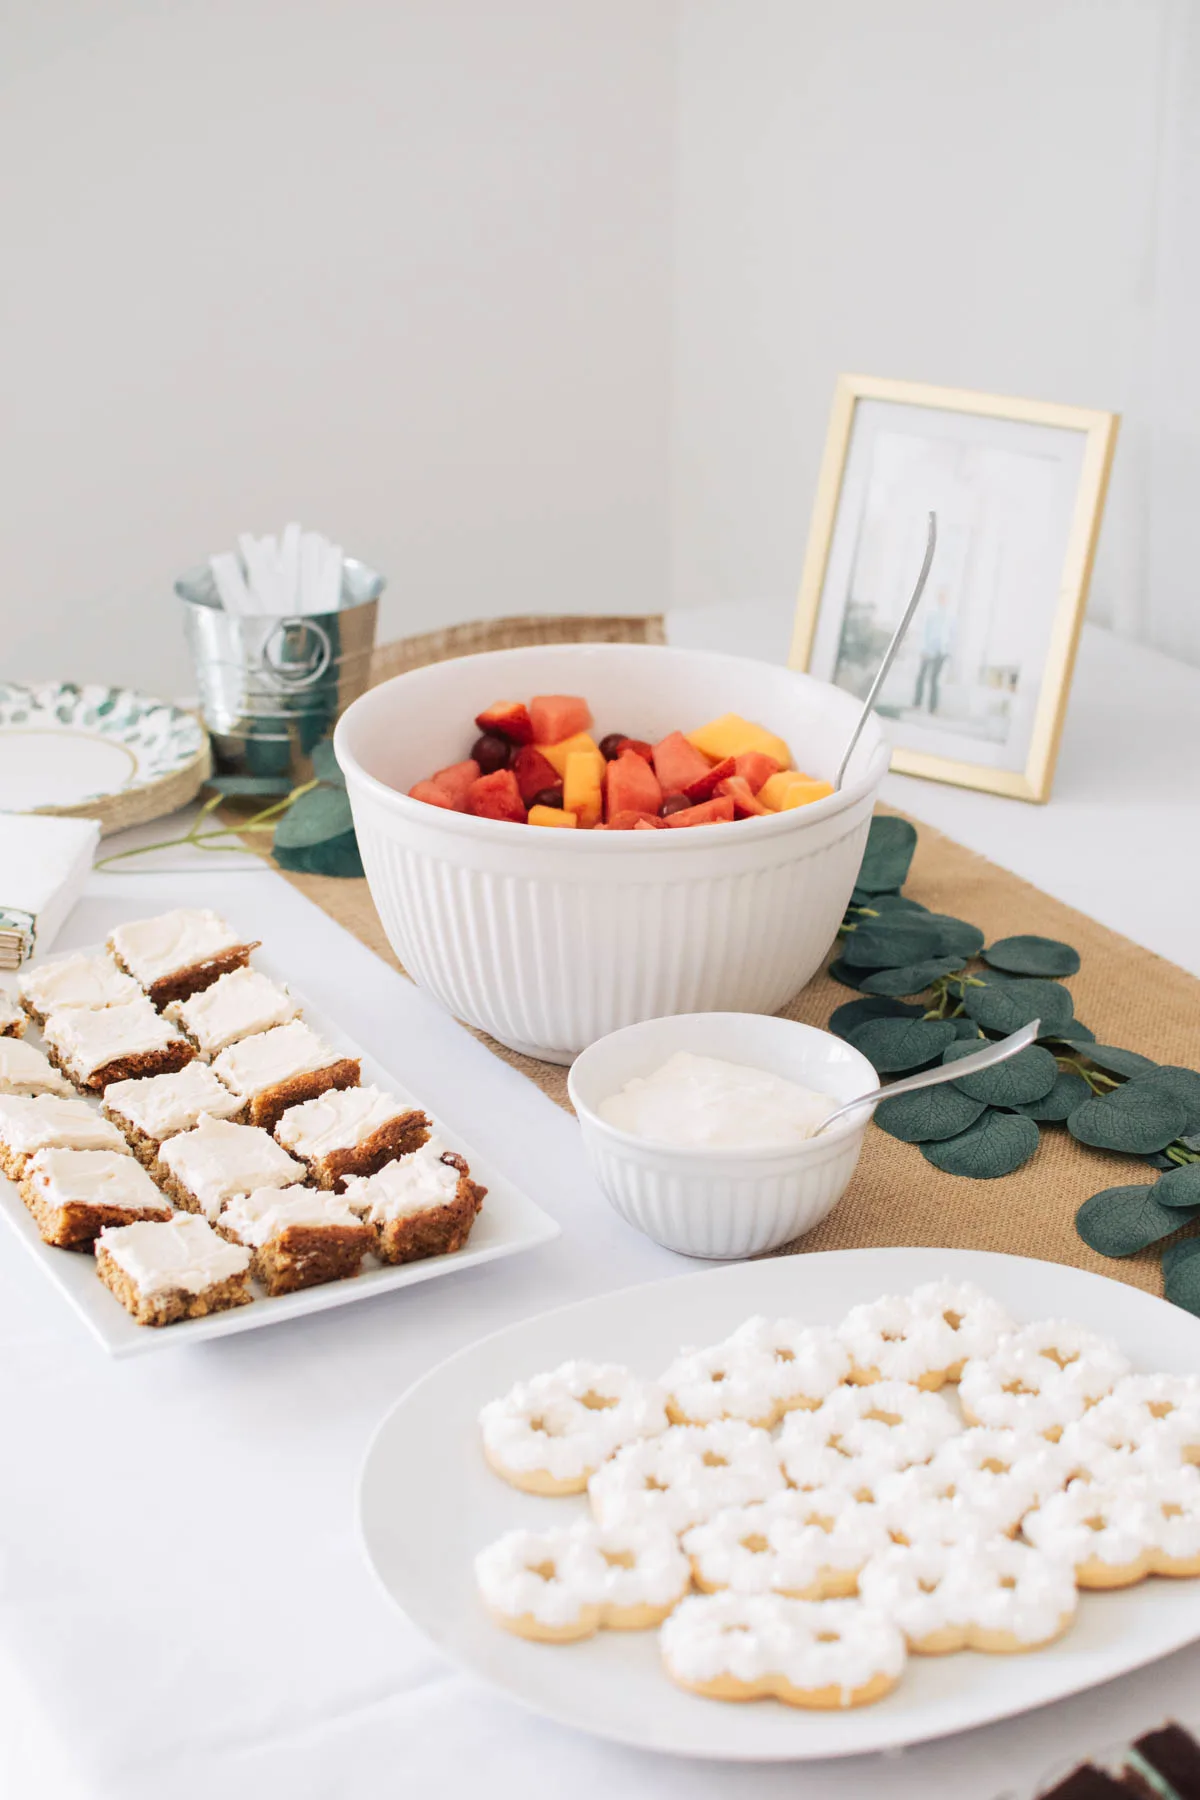 Plates of banana bars, cookies, and bowl of fruit on party food table.